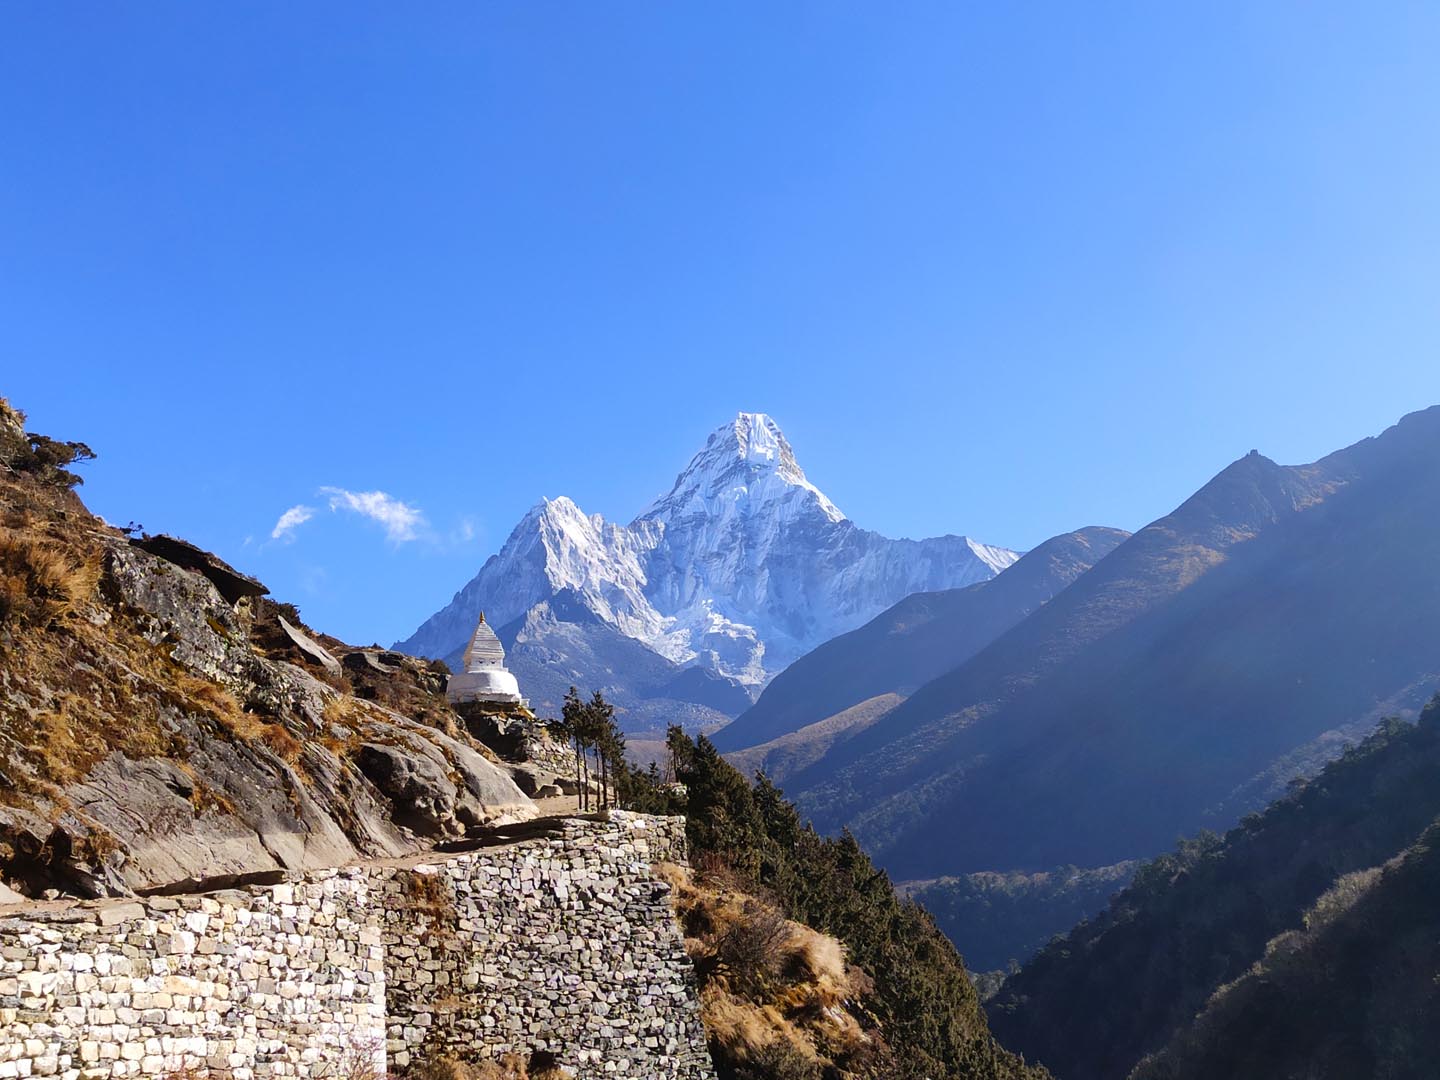 The mesmerizing view of Mt. Ama Dablam on the way to Dingboche